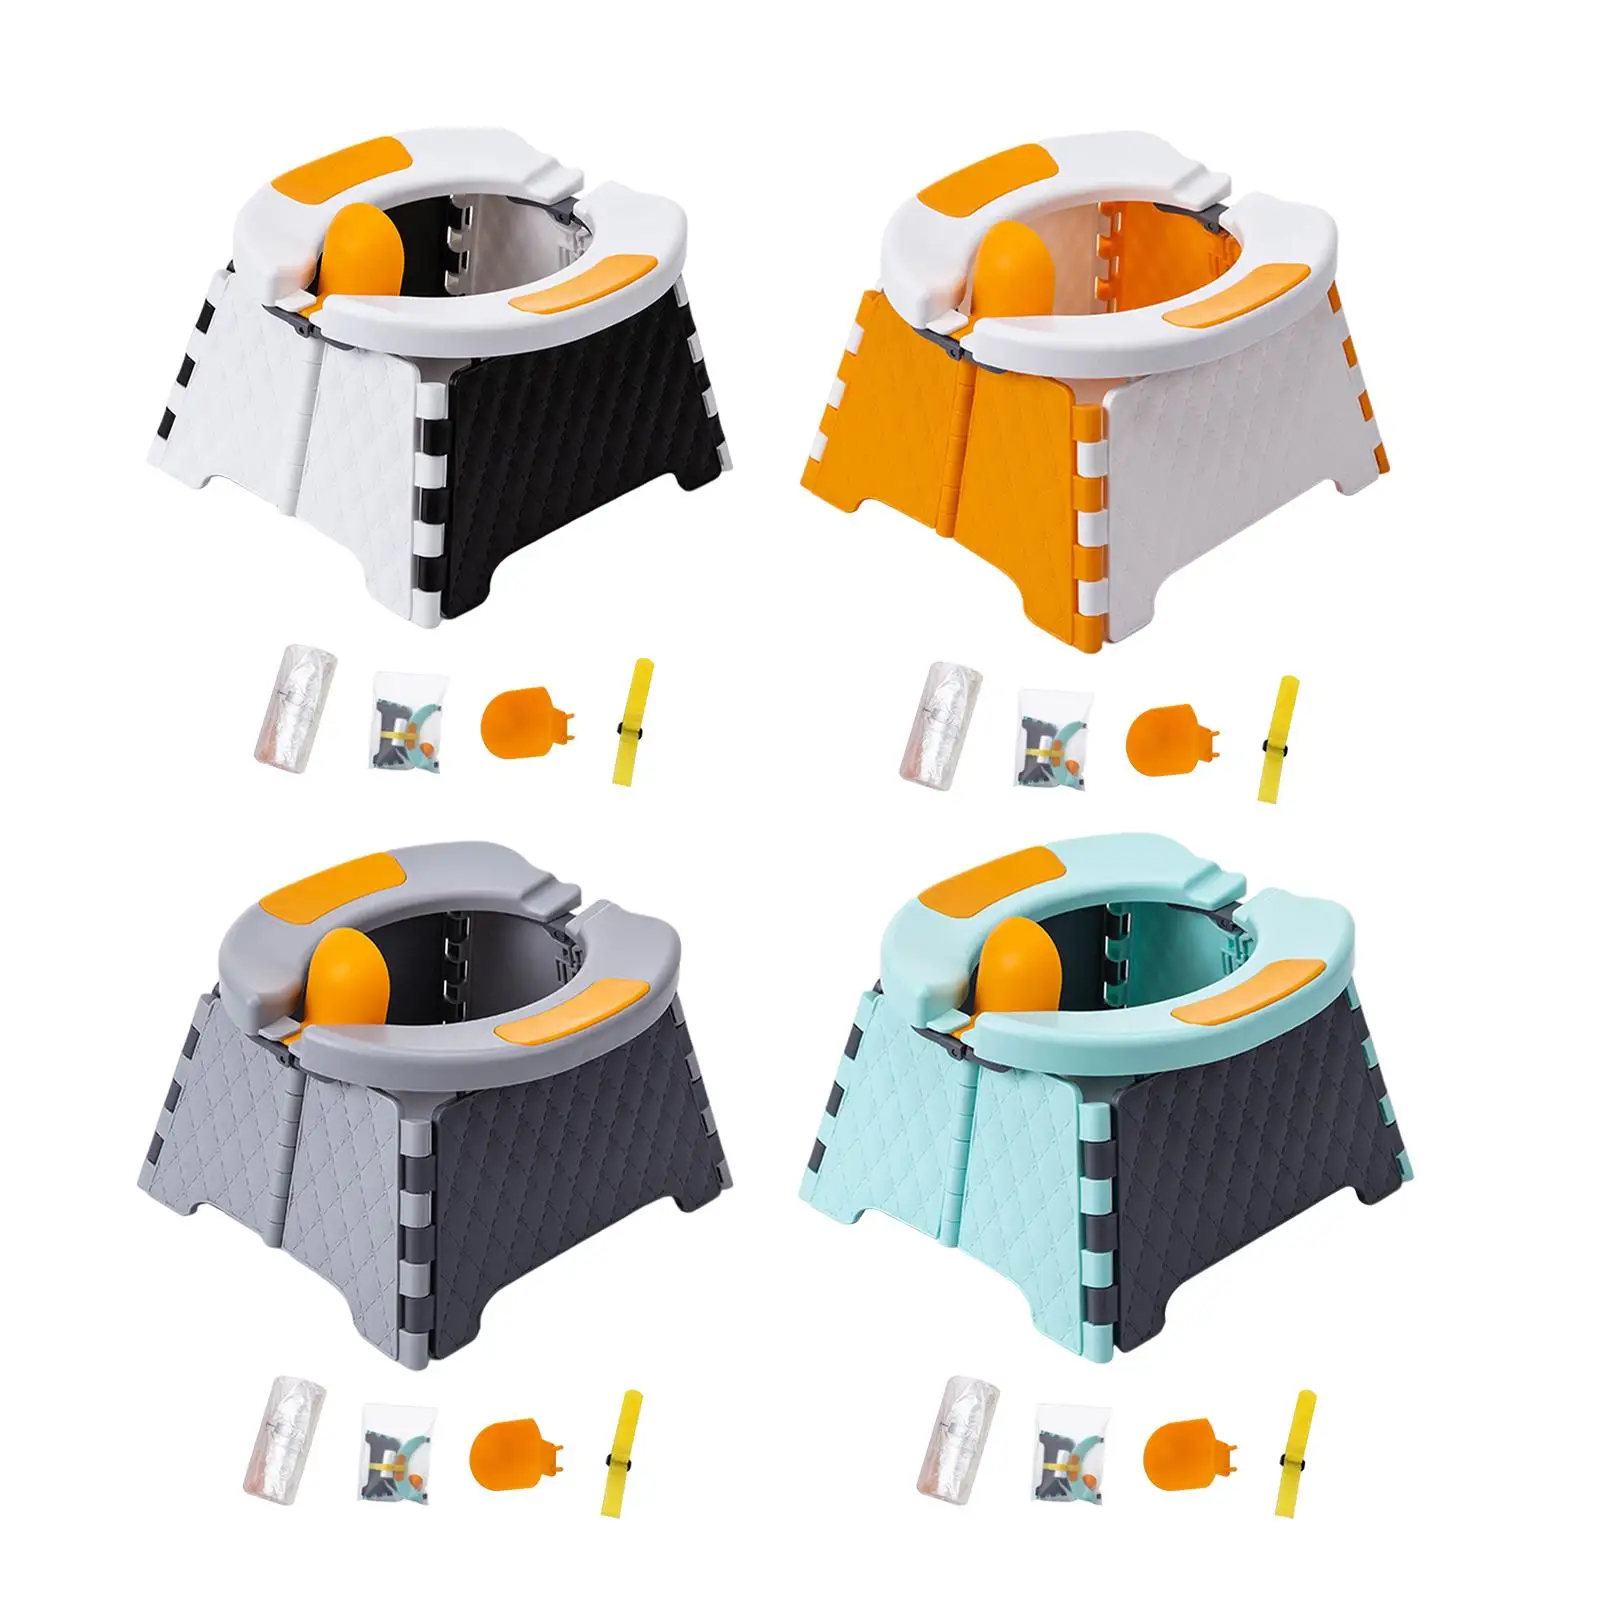 Portable Foldable Training Potty Seat  , for Camping, , Car Traveling etc Lightweight Convenience to Clean